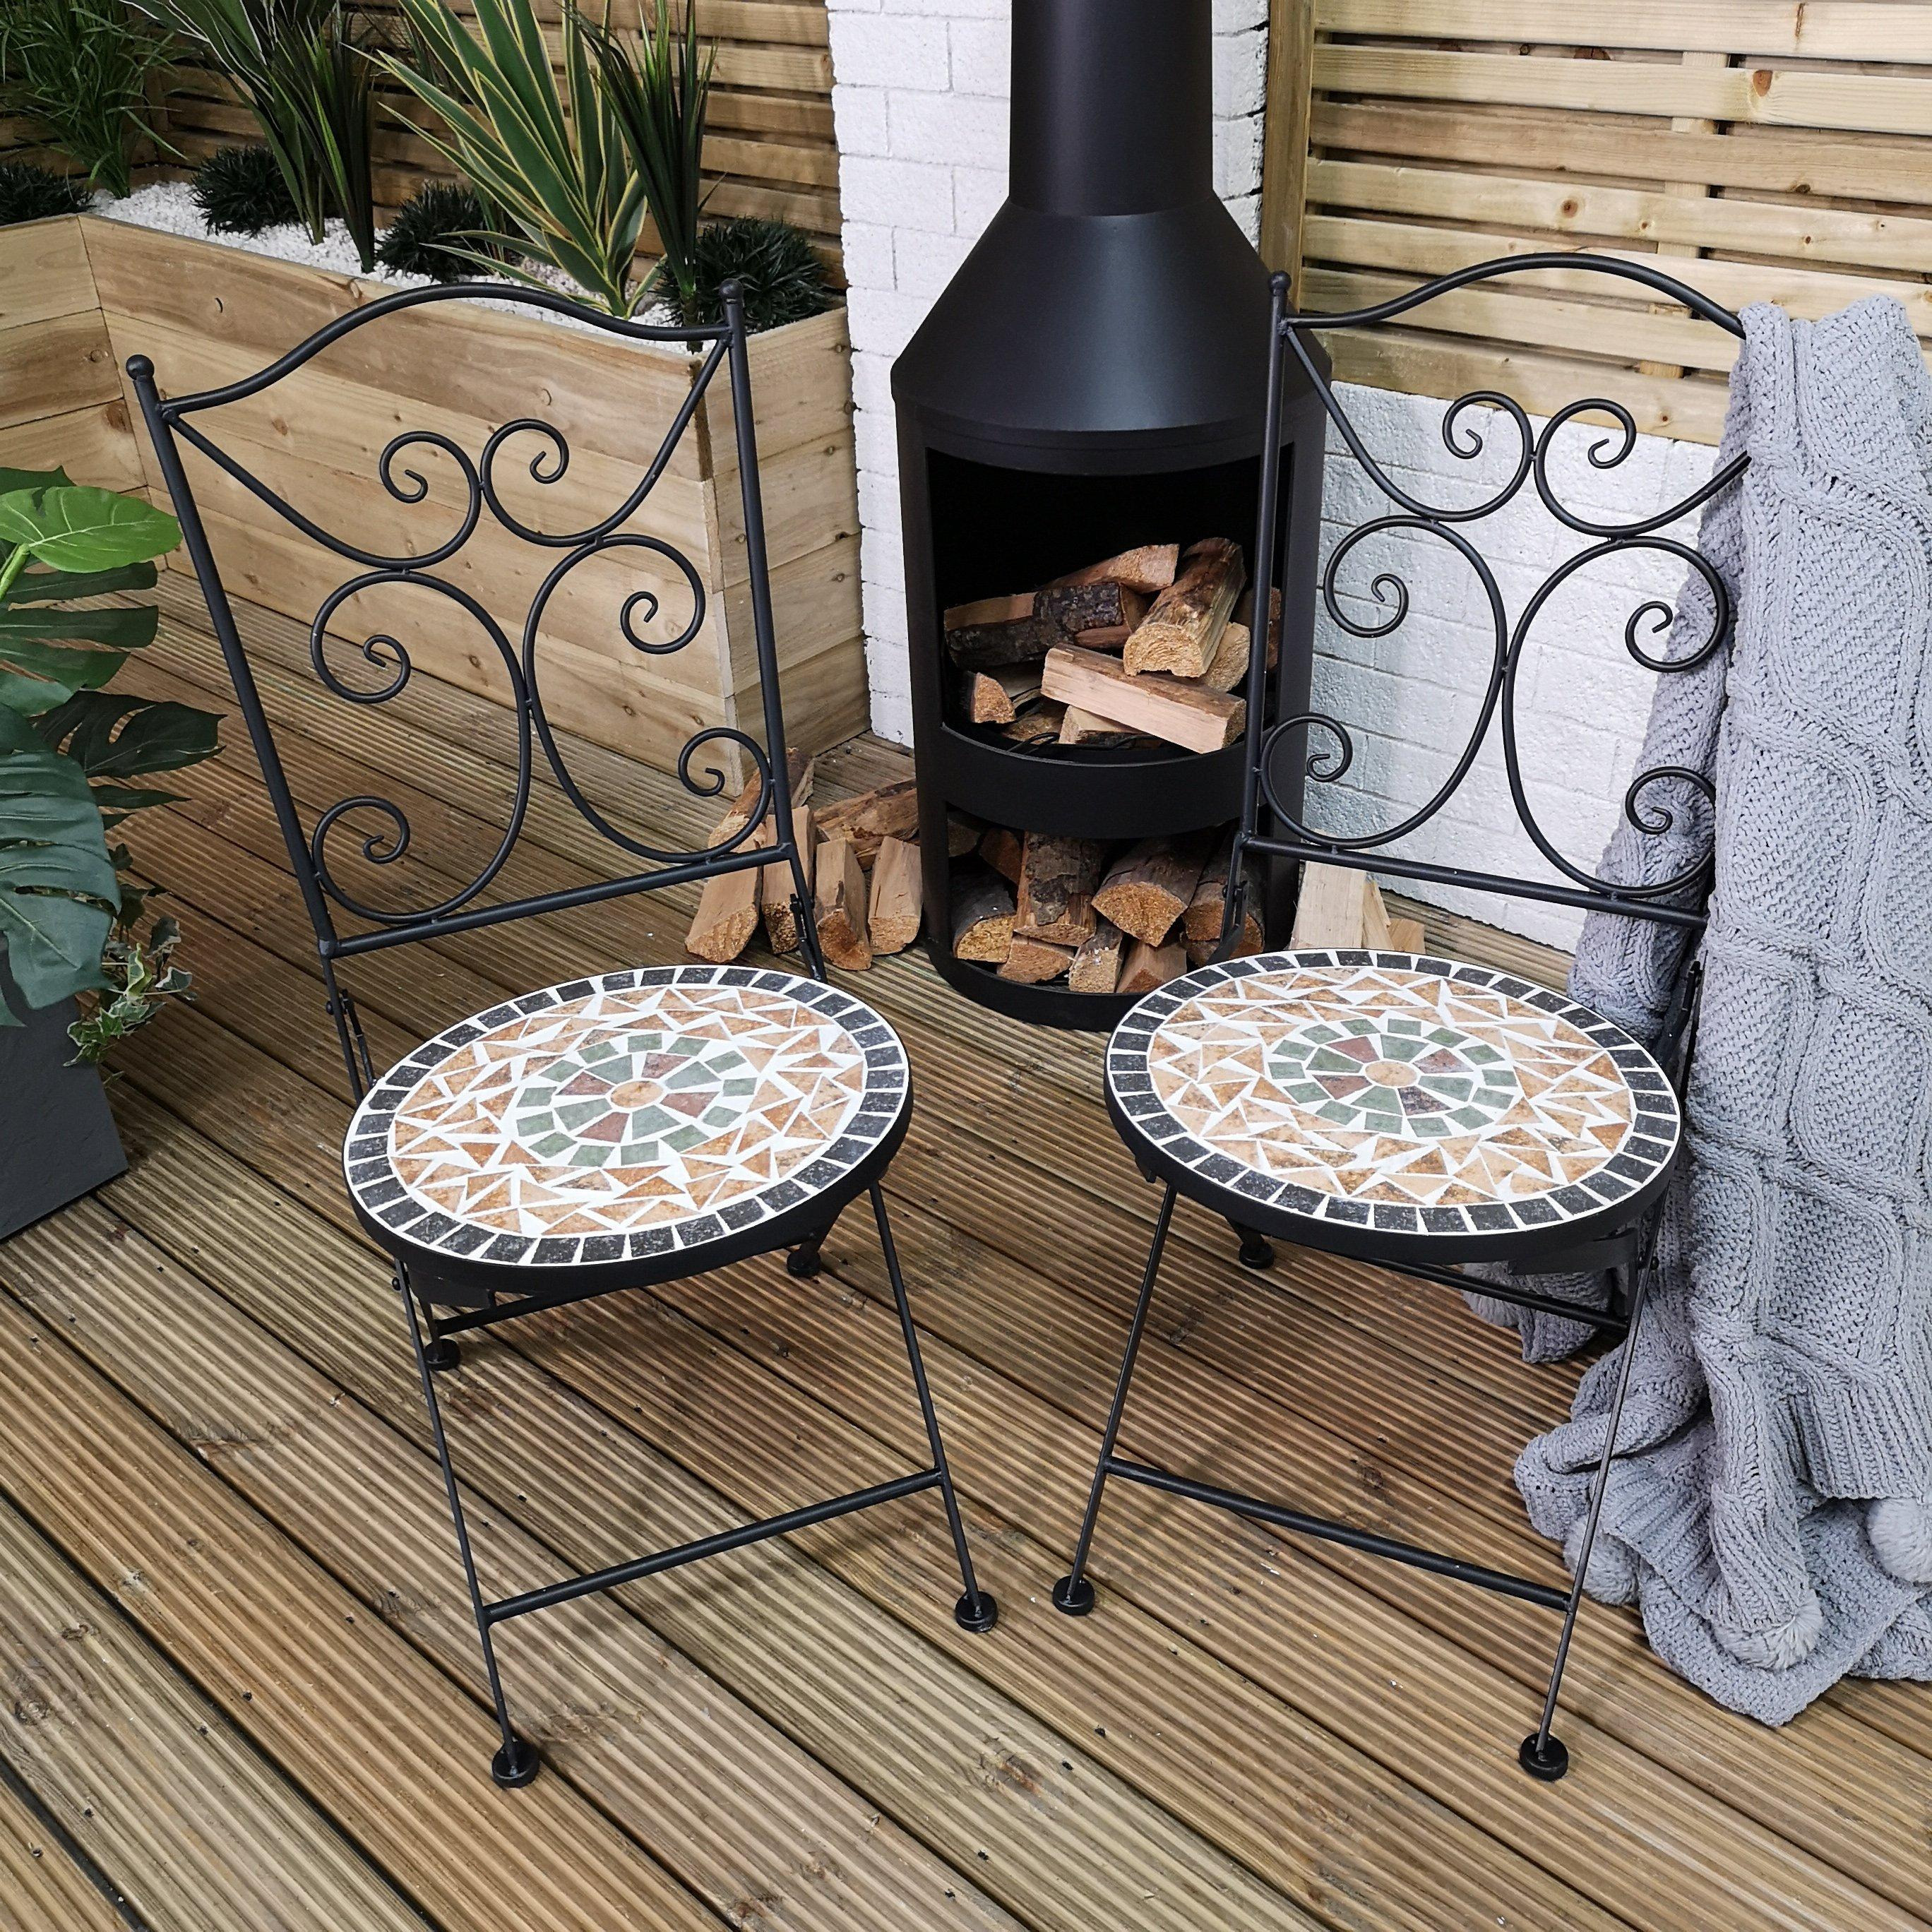 Set of 2 Outdoor Black Mosaic Metal Bistro Chairs for Garden Patio Balcony - image 1